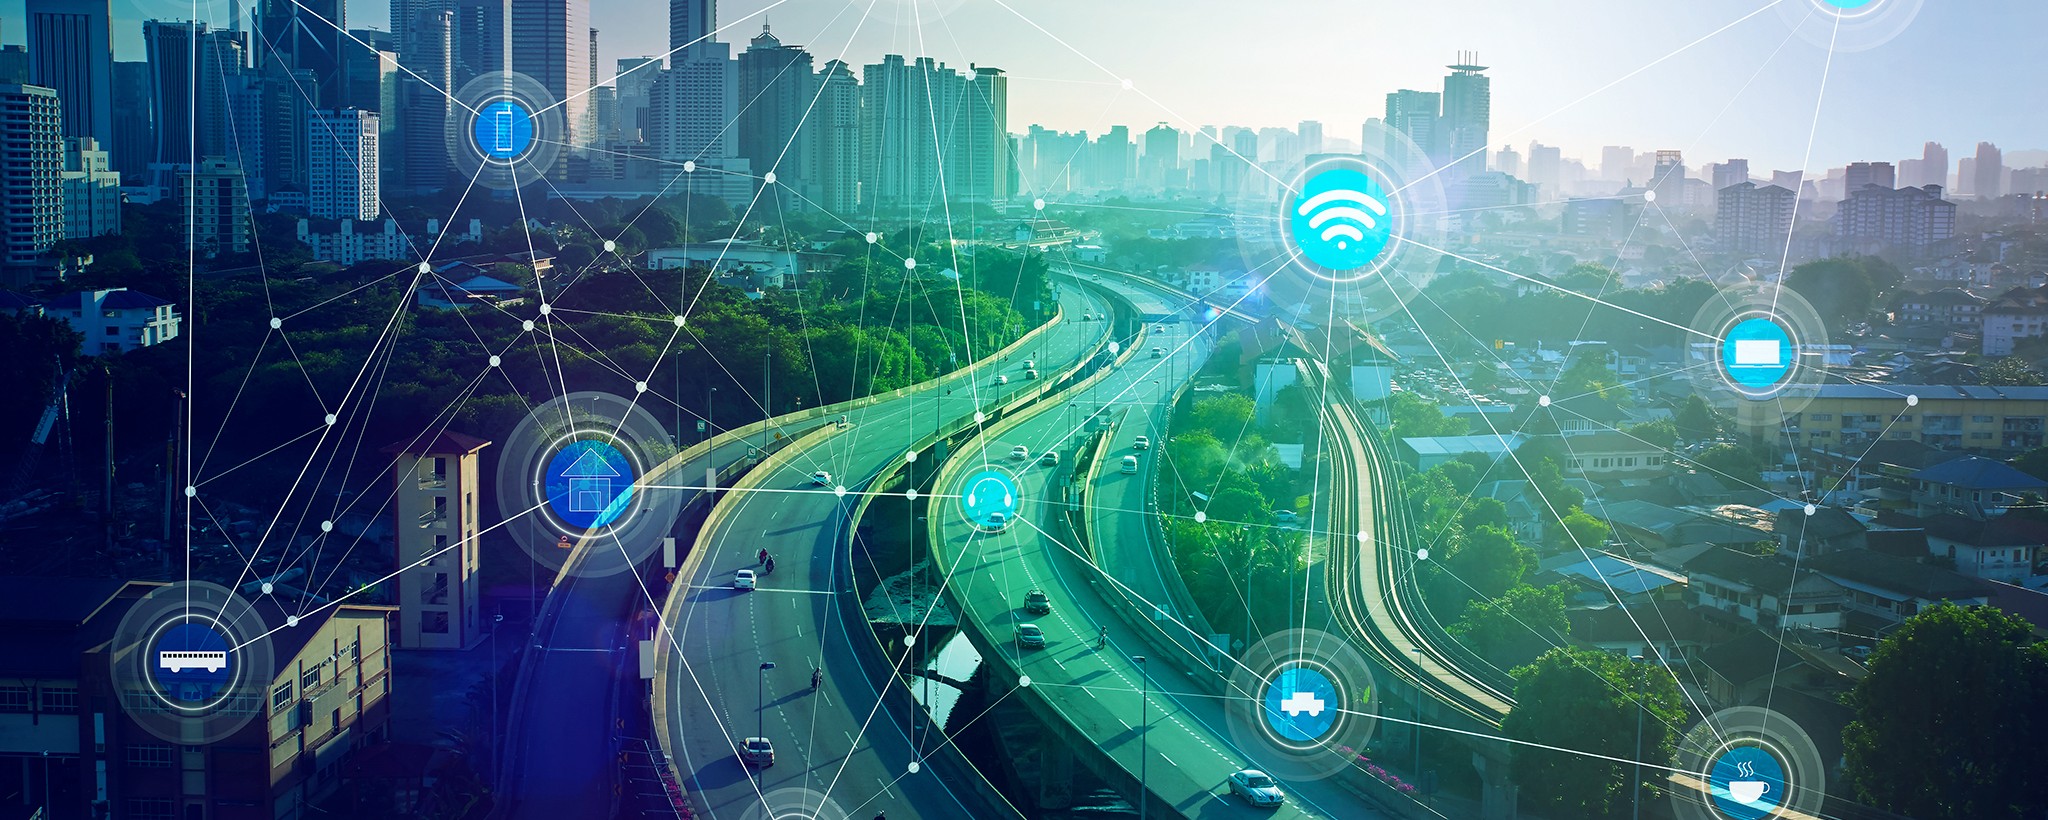 mobility-and-connectivity-solutions-zf